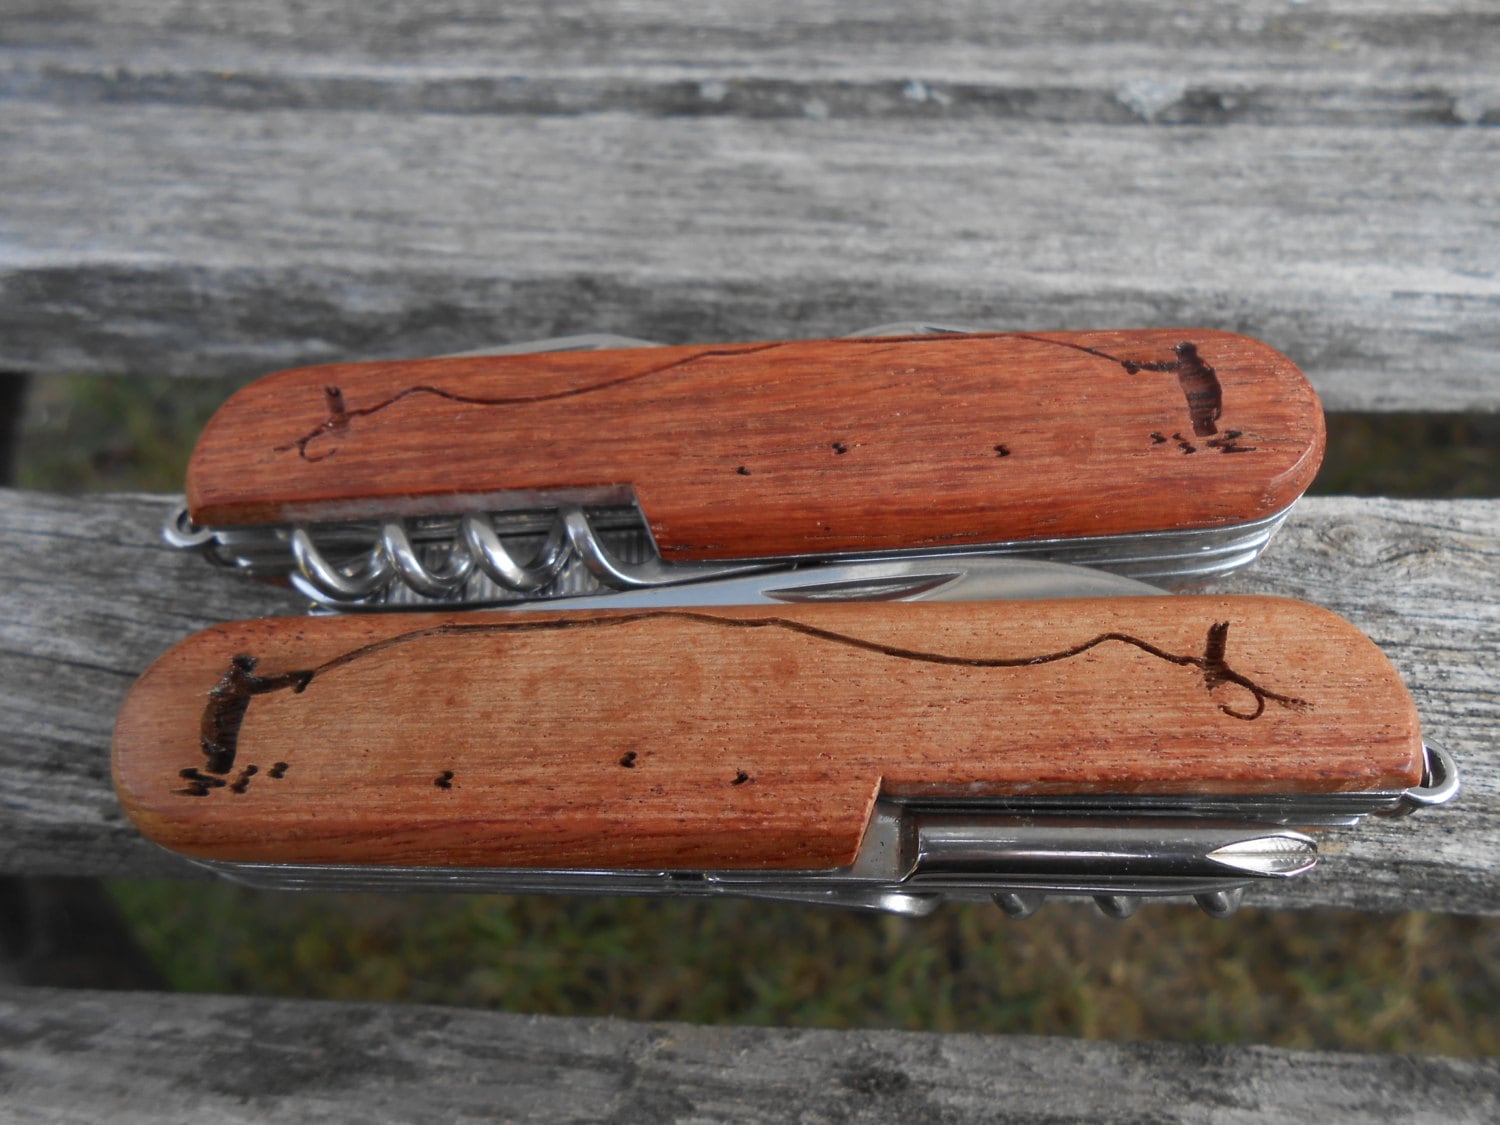 Buy FLY FISHING Pocket Knife, Father's Day, Groomsmen Gift